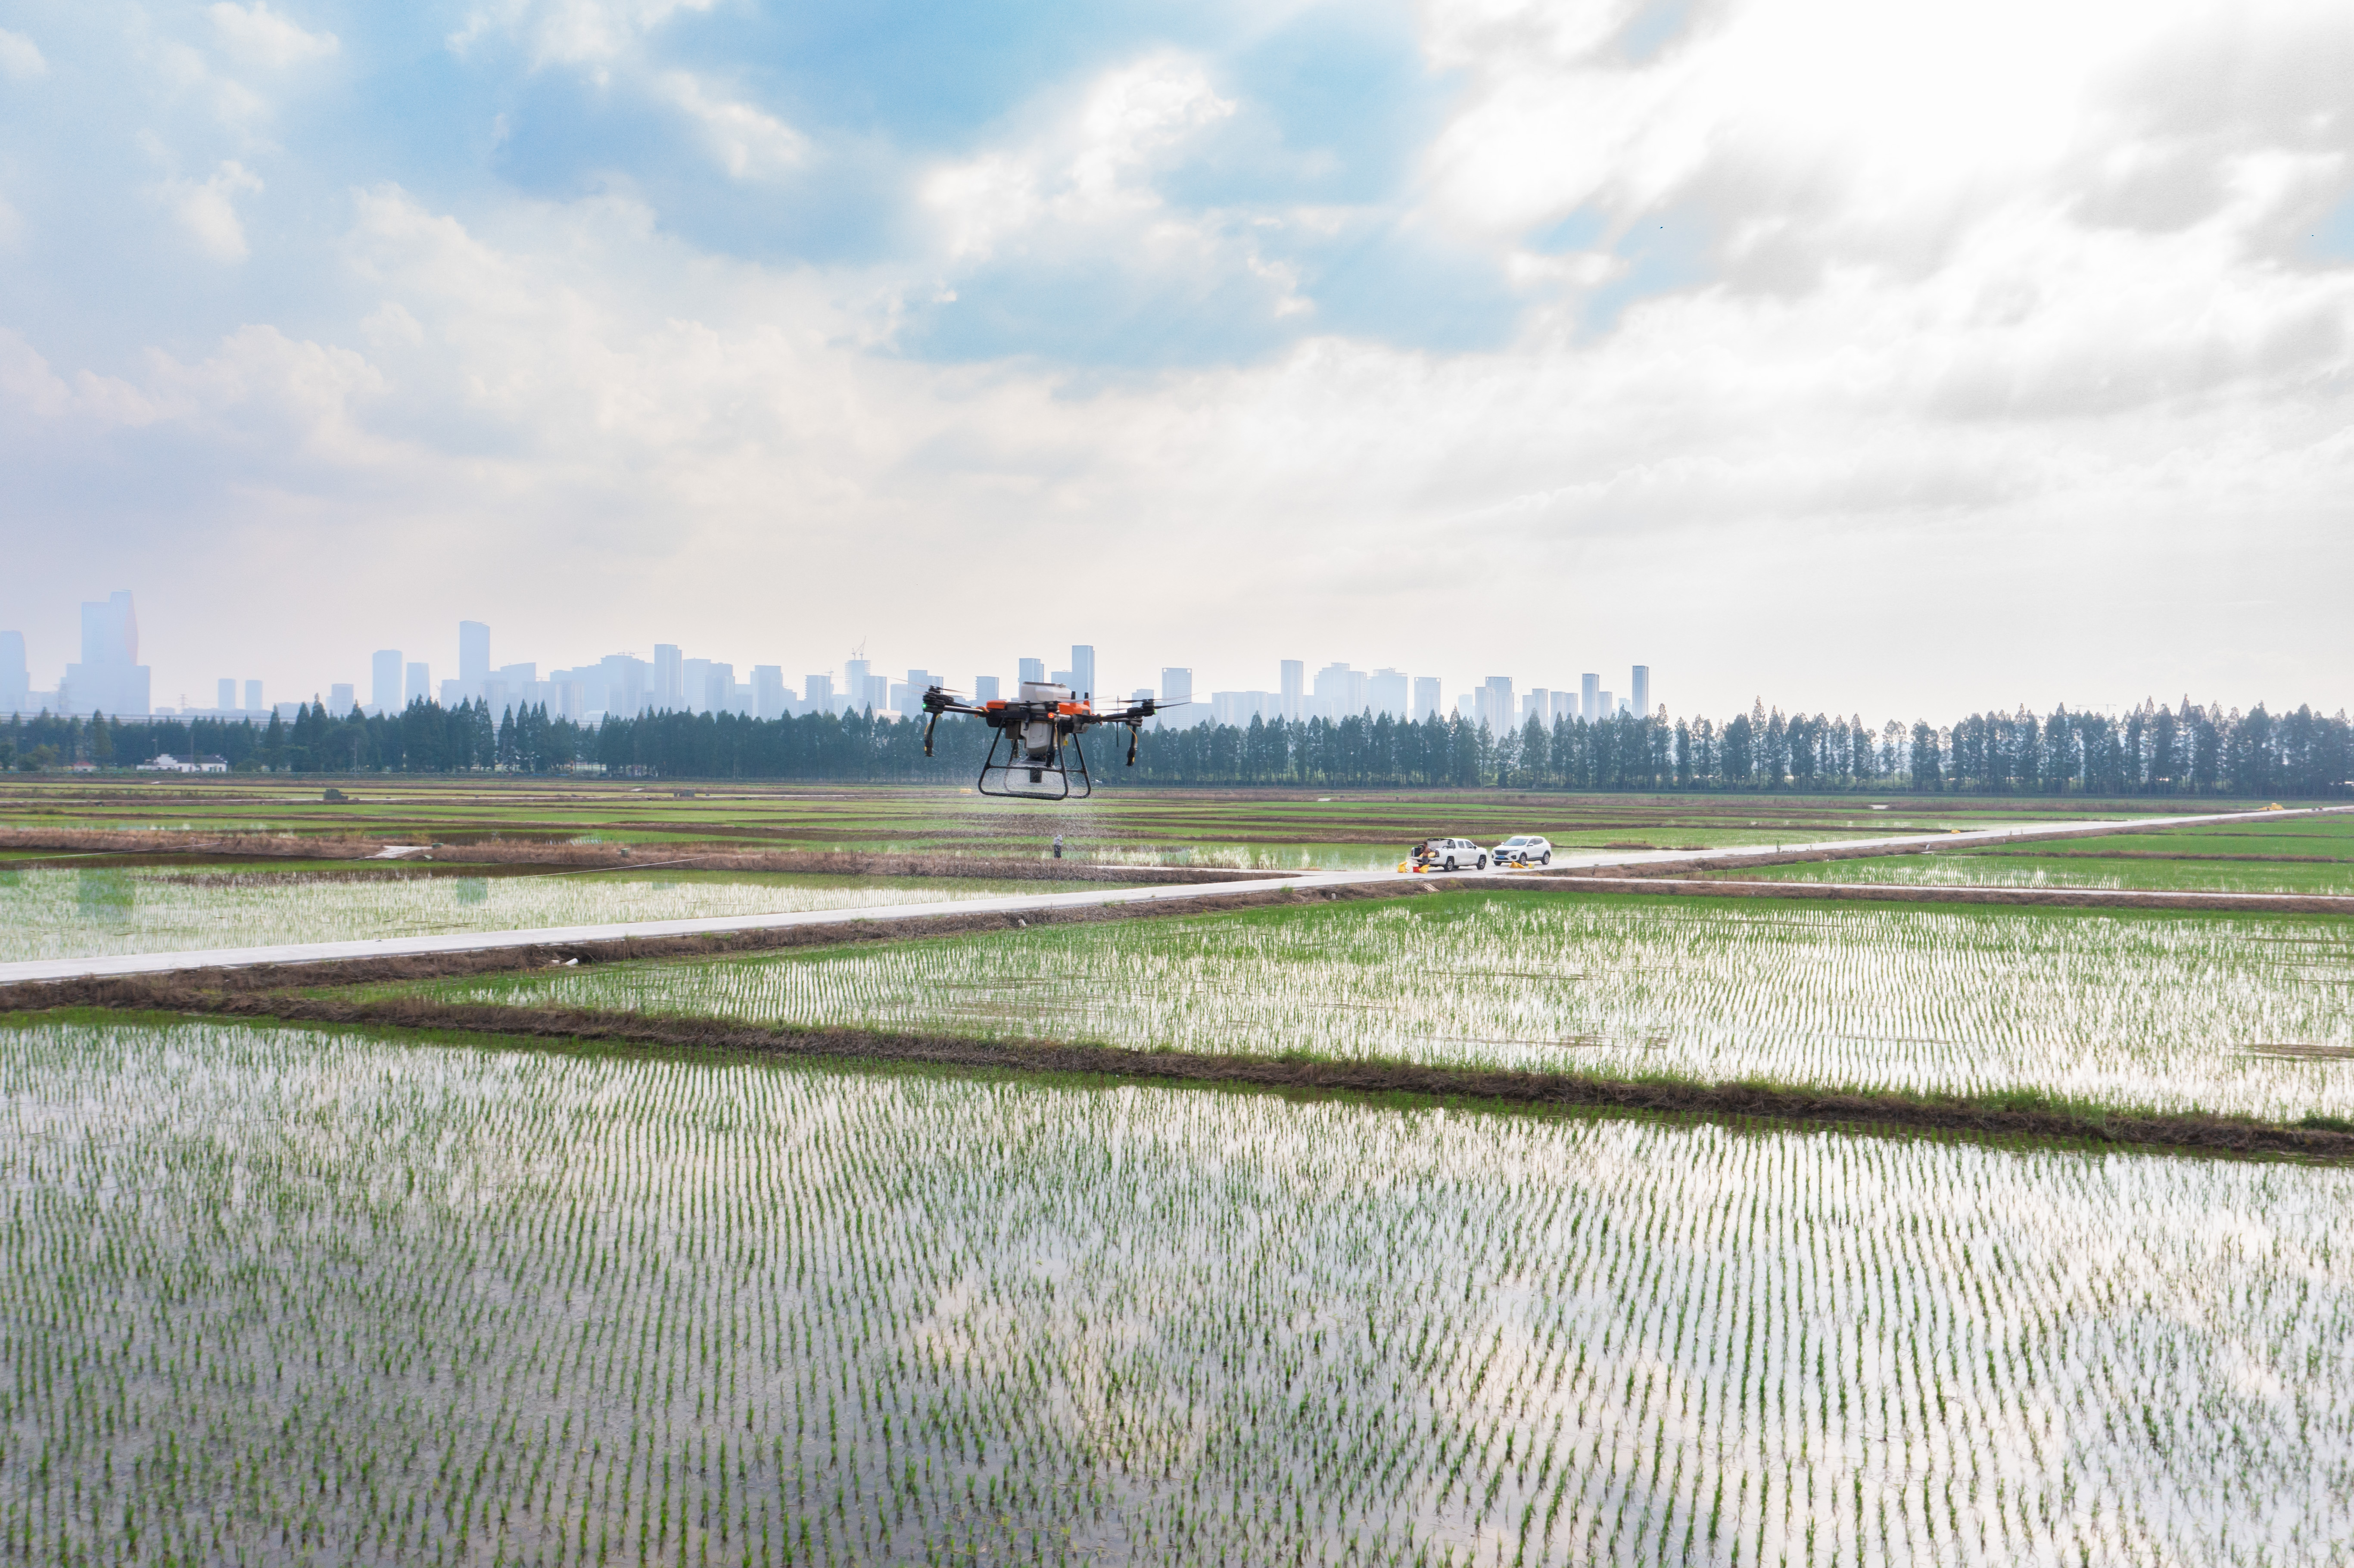 Exploring the Applications of Drones for Spraying Crops